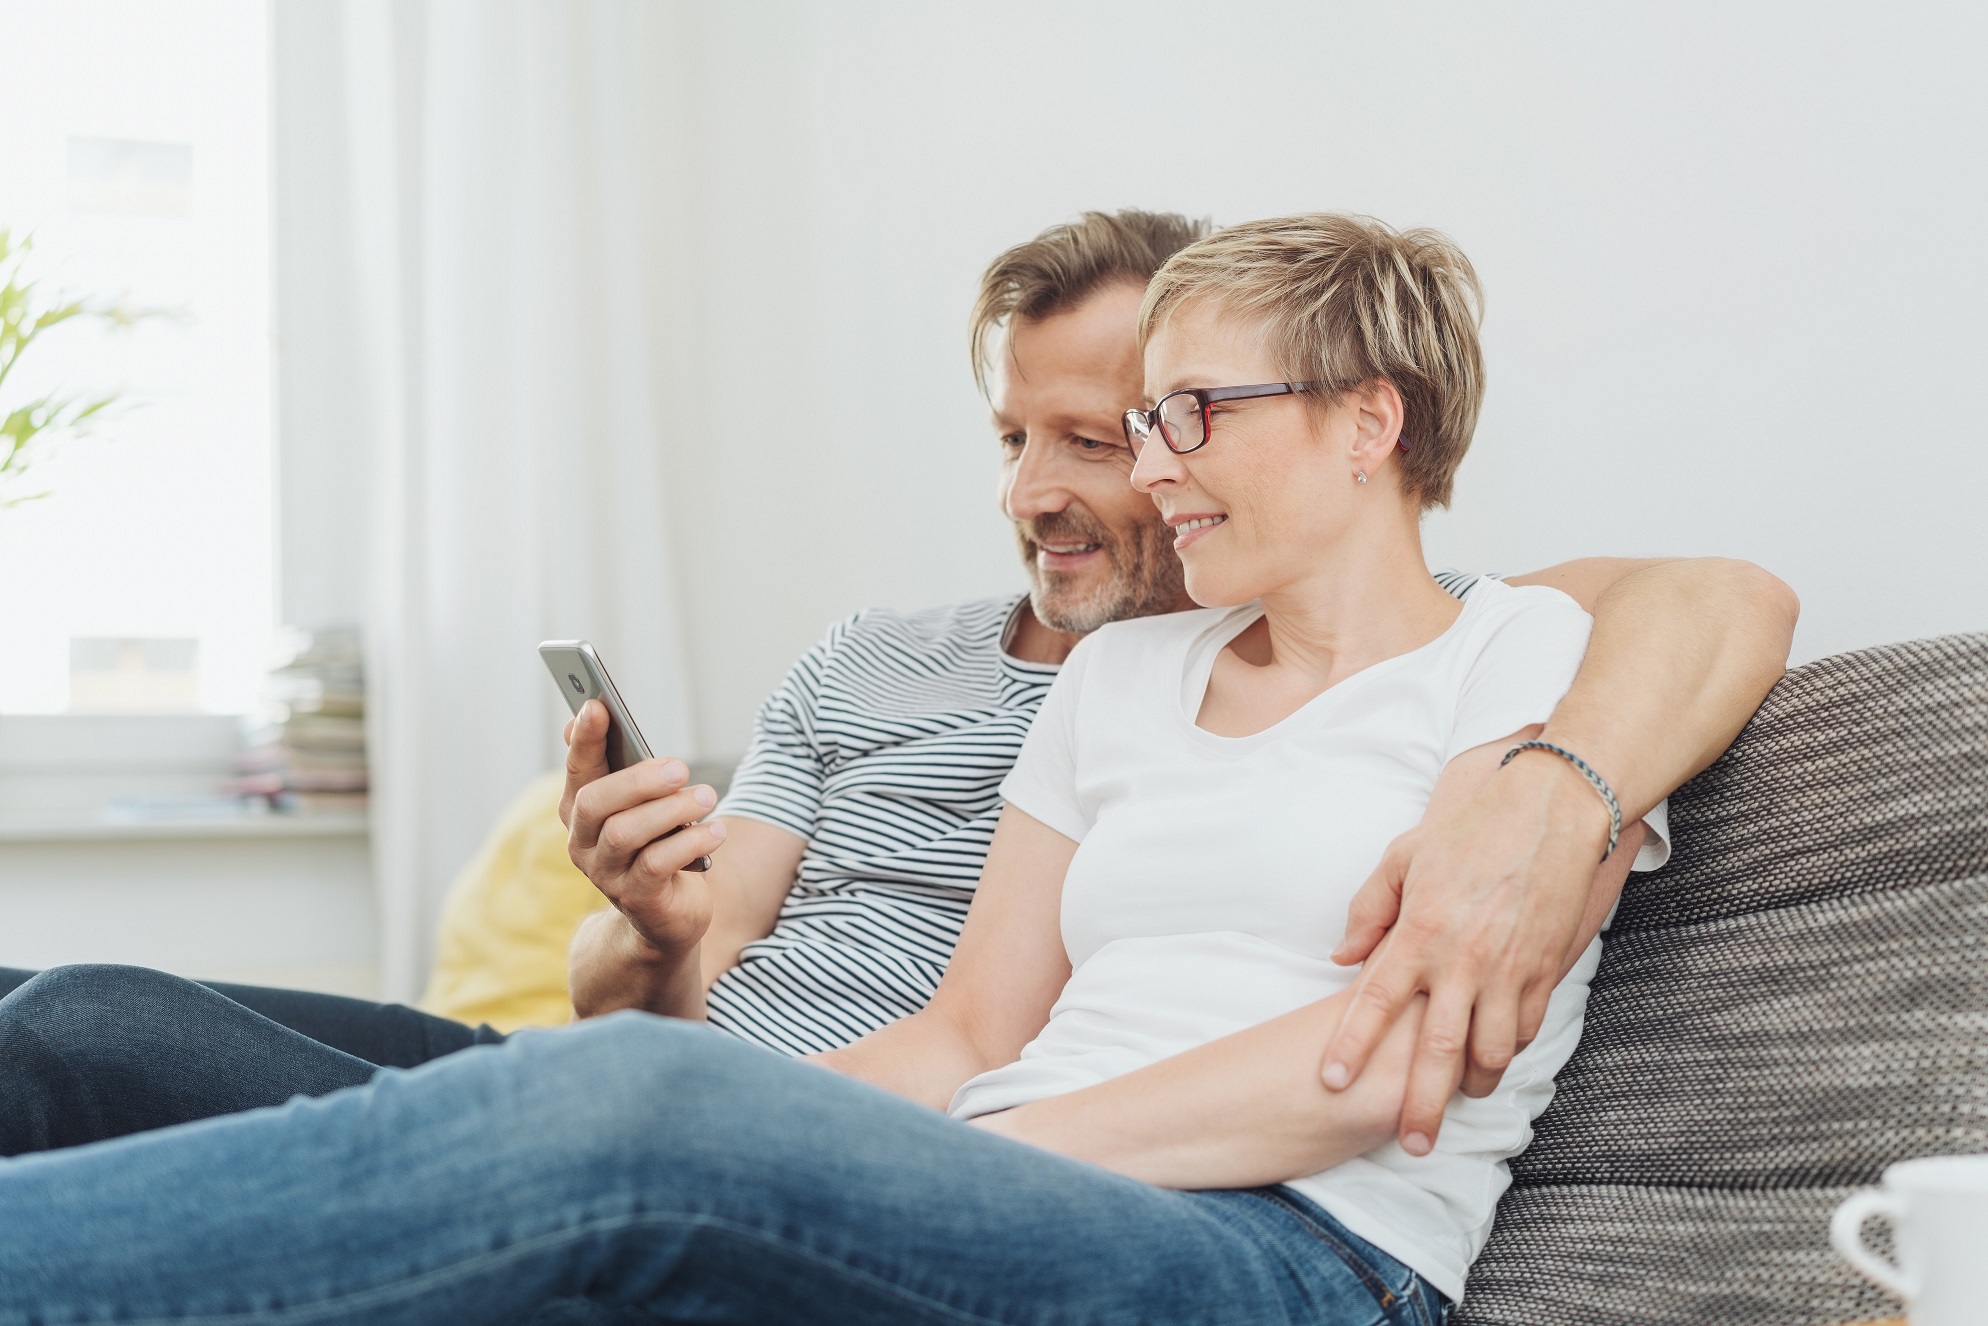 Middle-aged,Couple,Relaxing,On,The,Sofa,At,Home,Looking,At